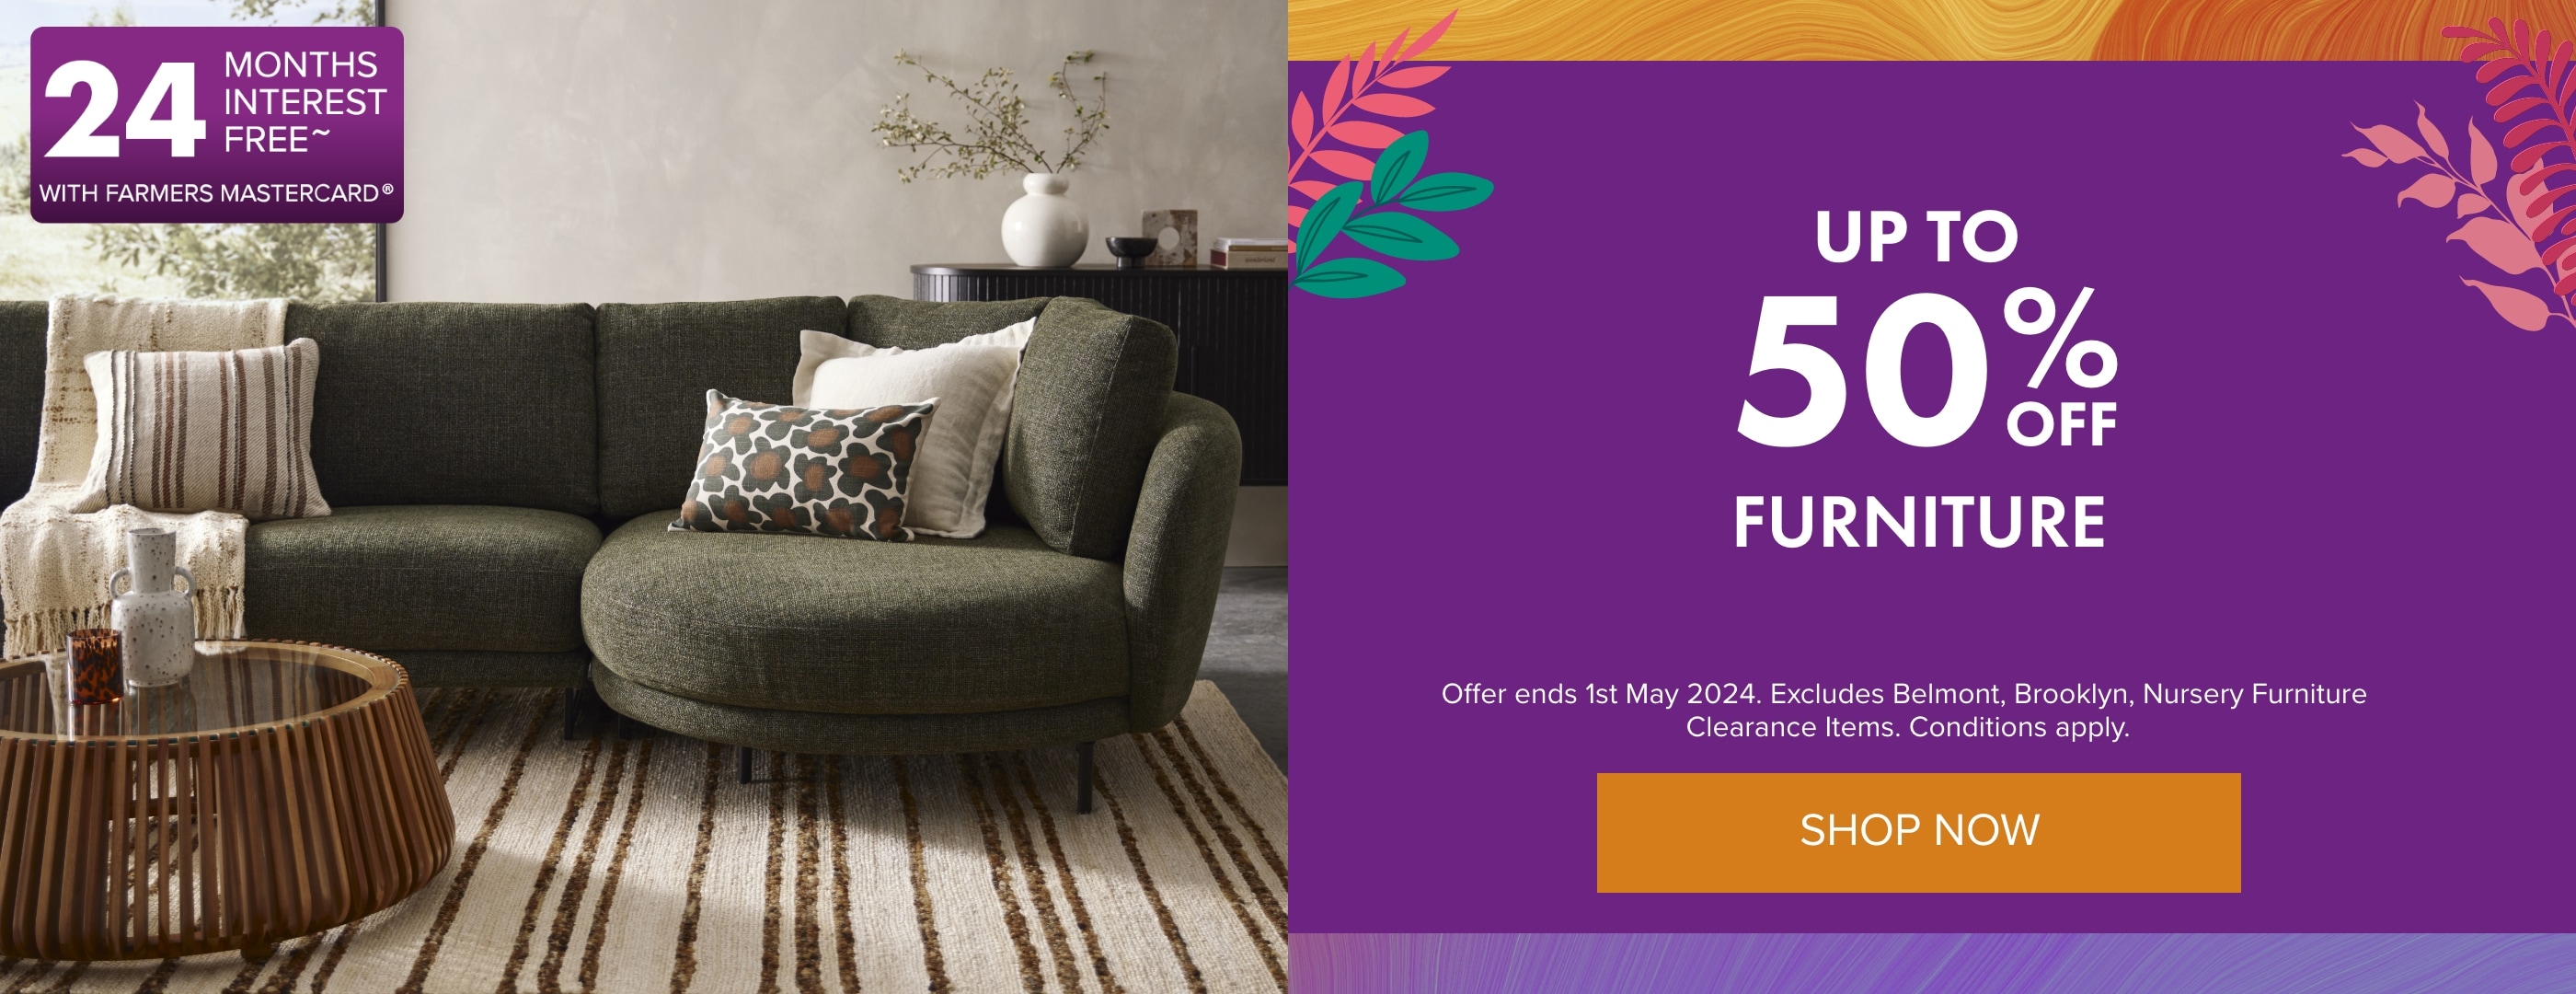 Up to 50% OFF Furniture